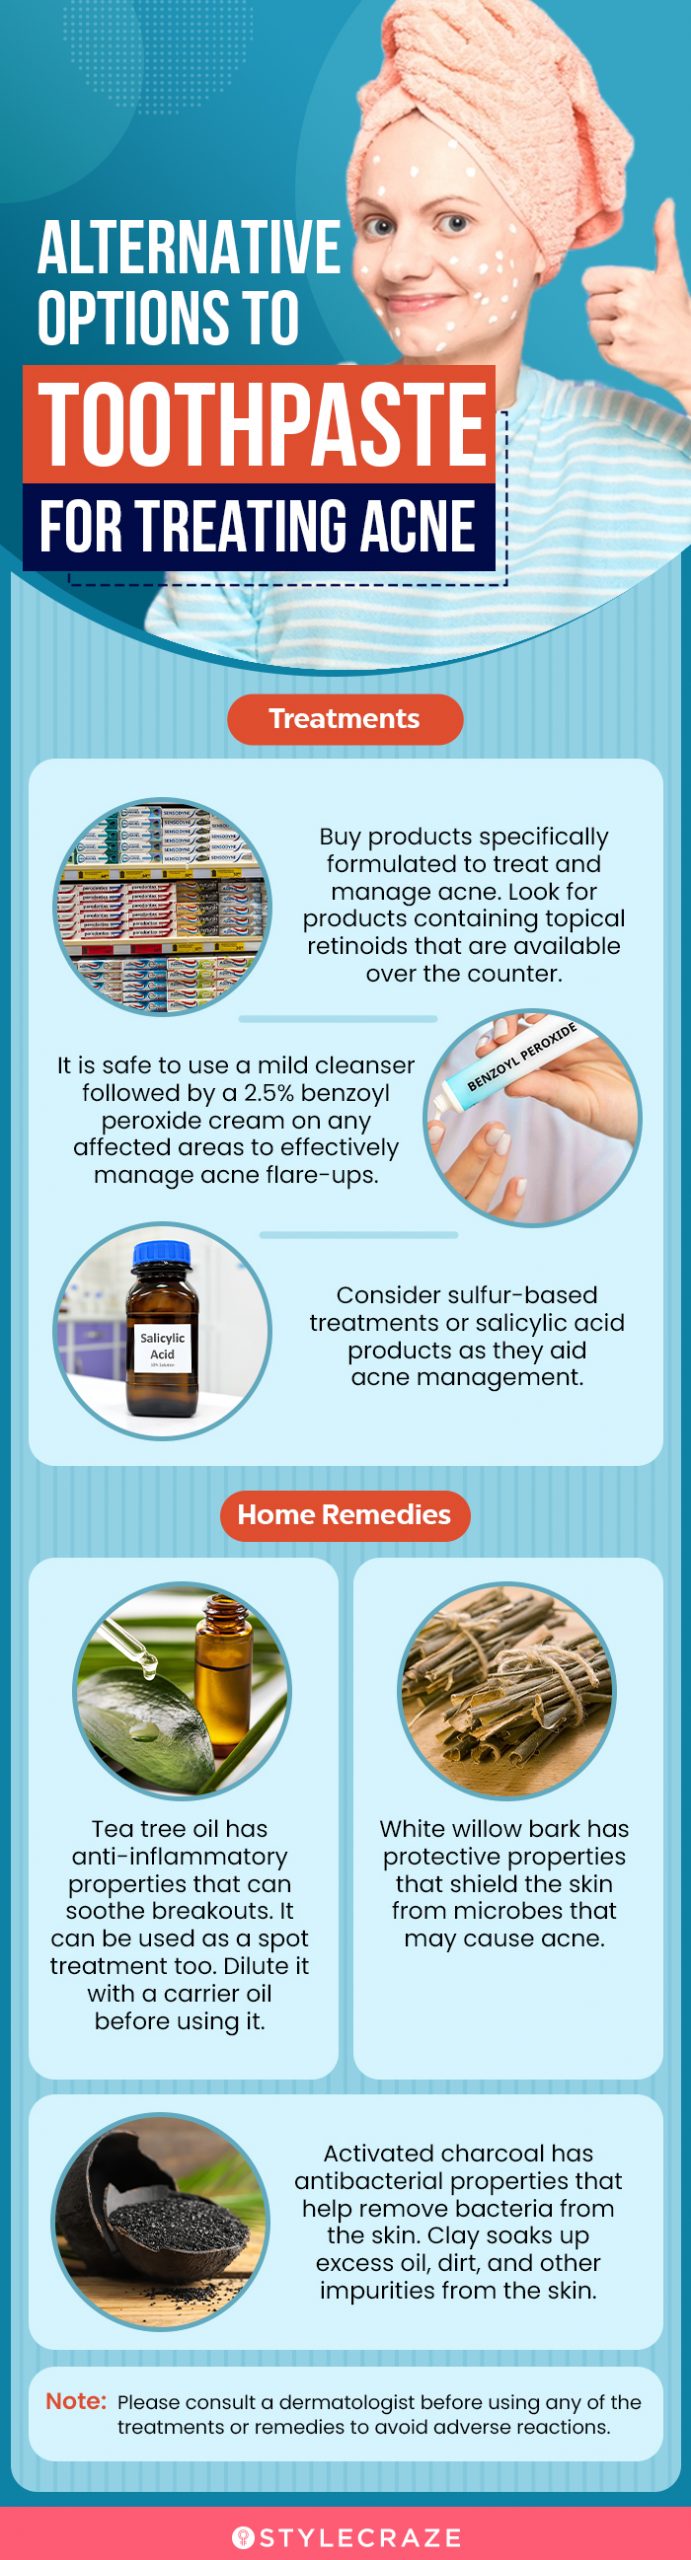 alternative options to toothpaste for treating acne (infographic)